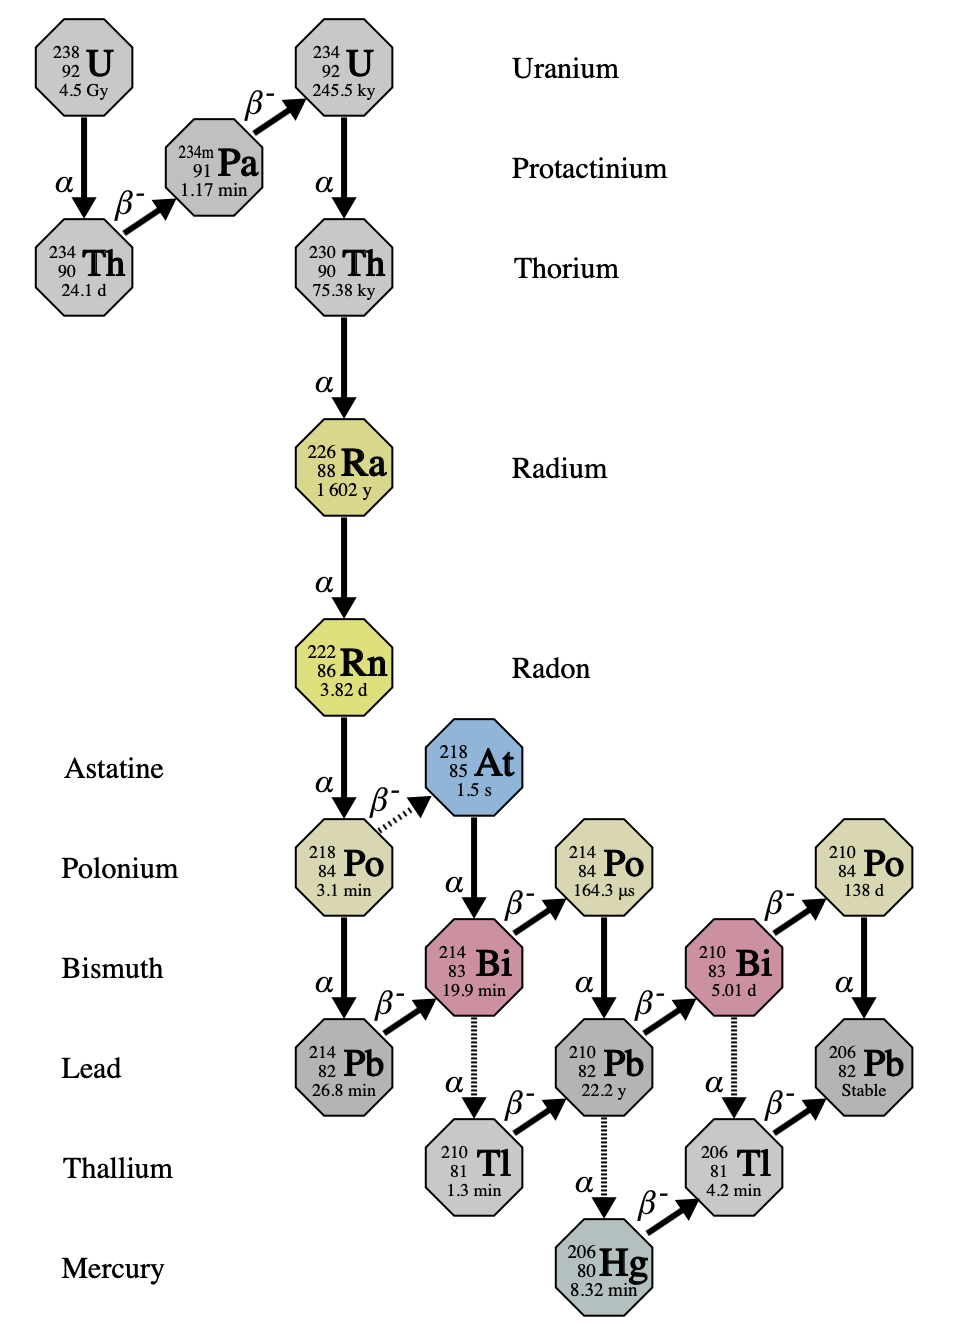 Decay chain of uranium-238, with radon near the middle